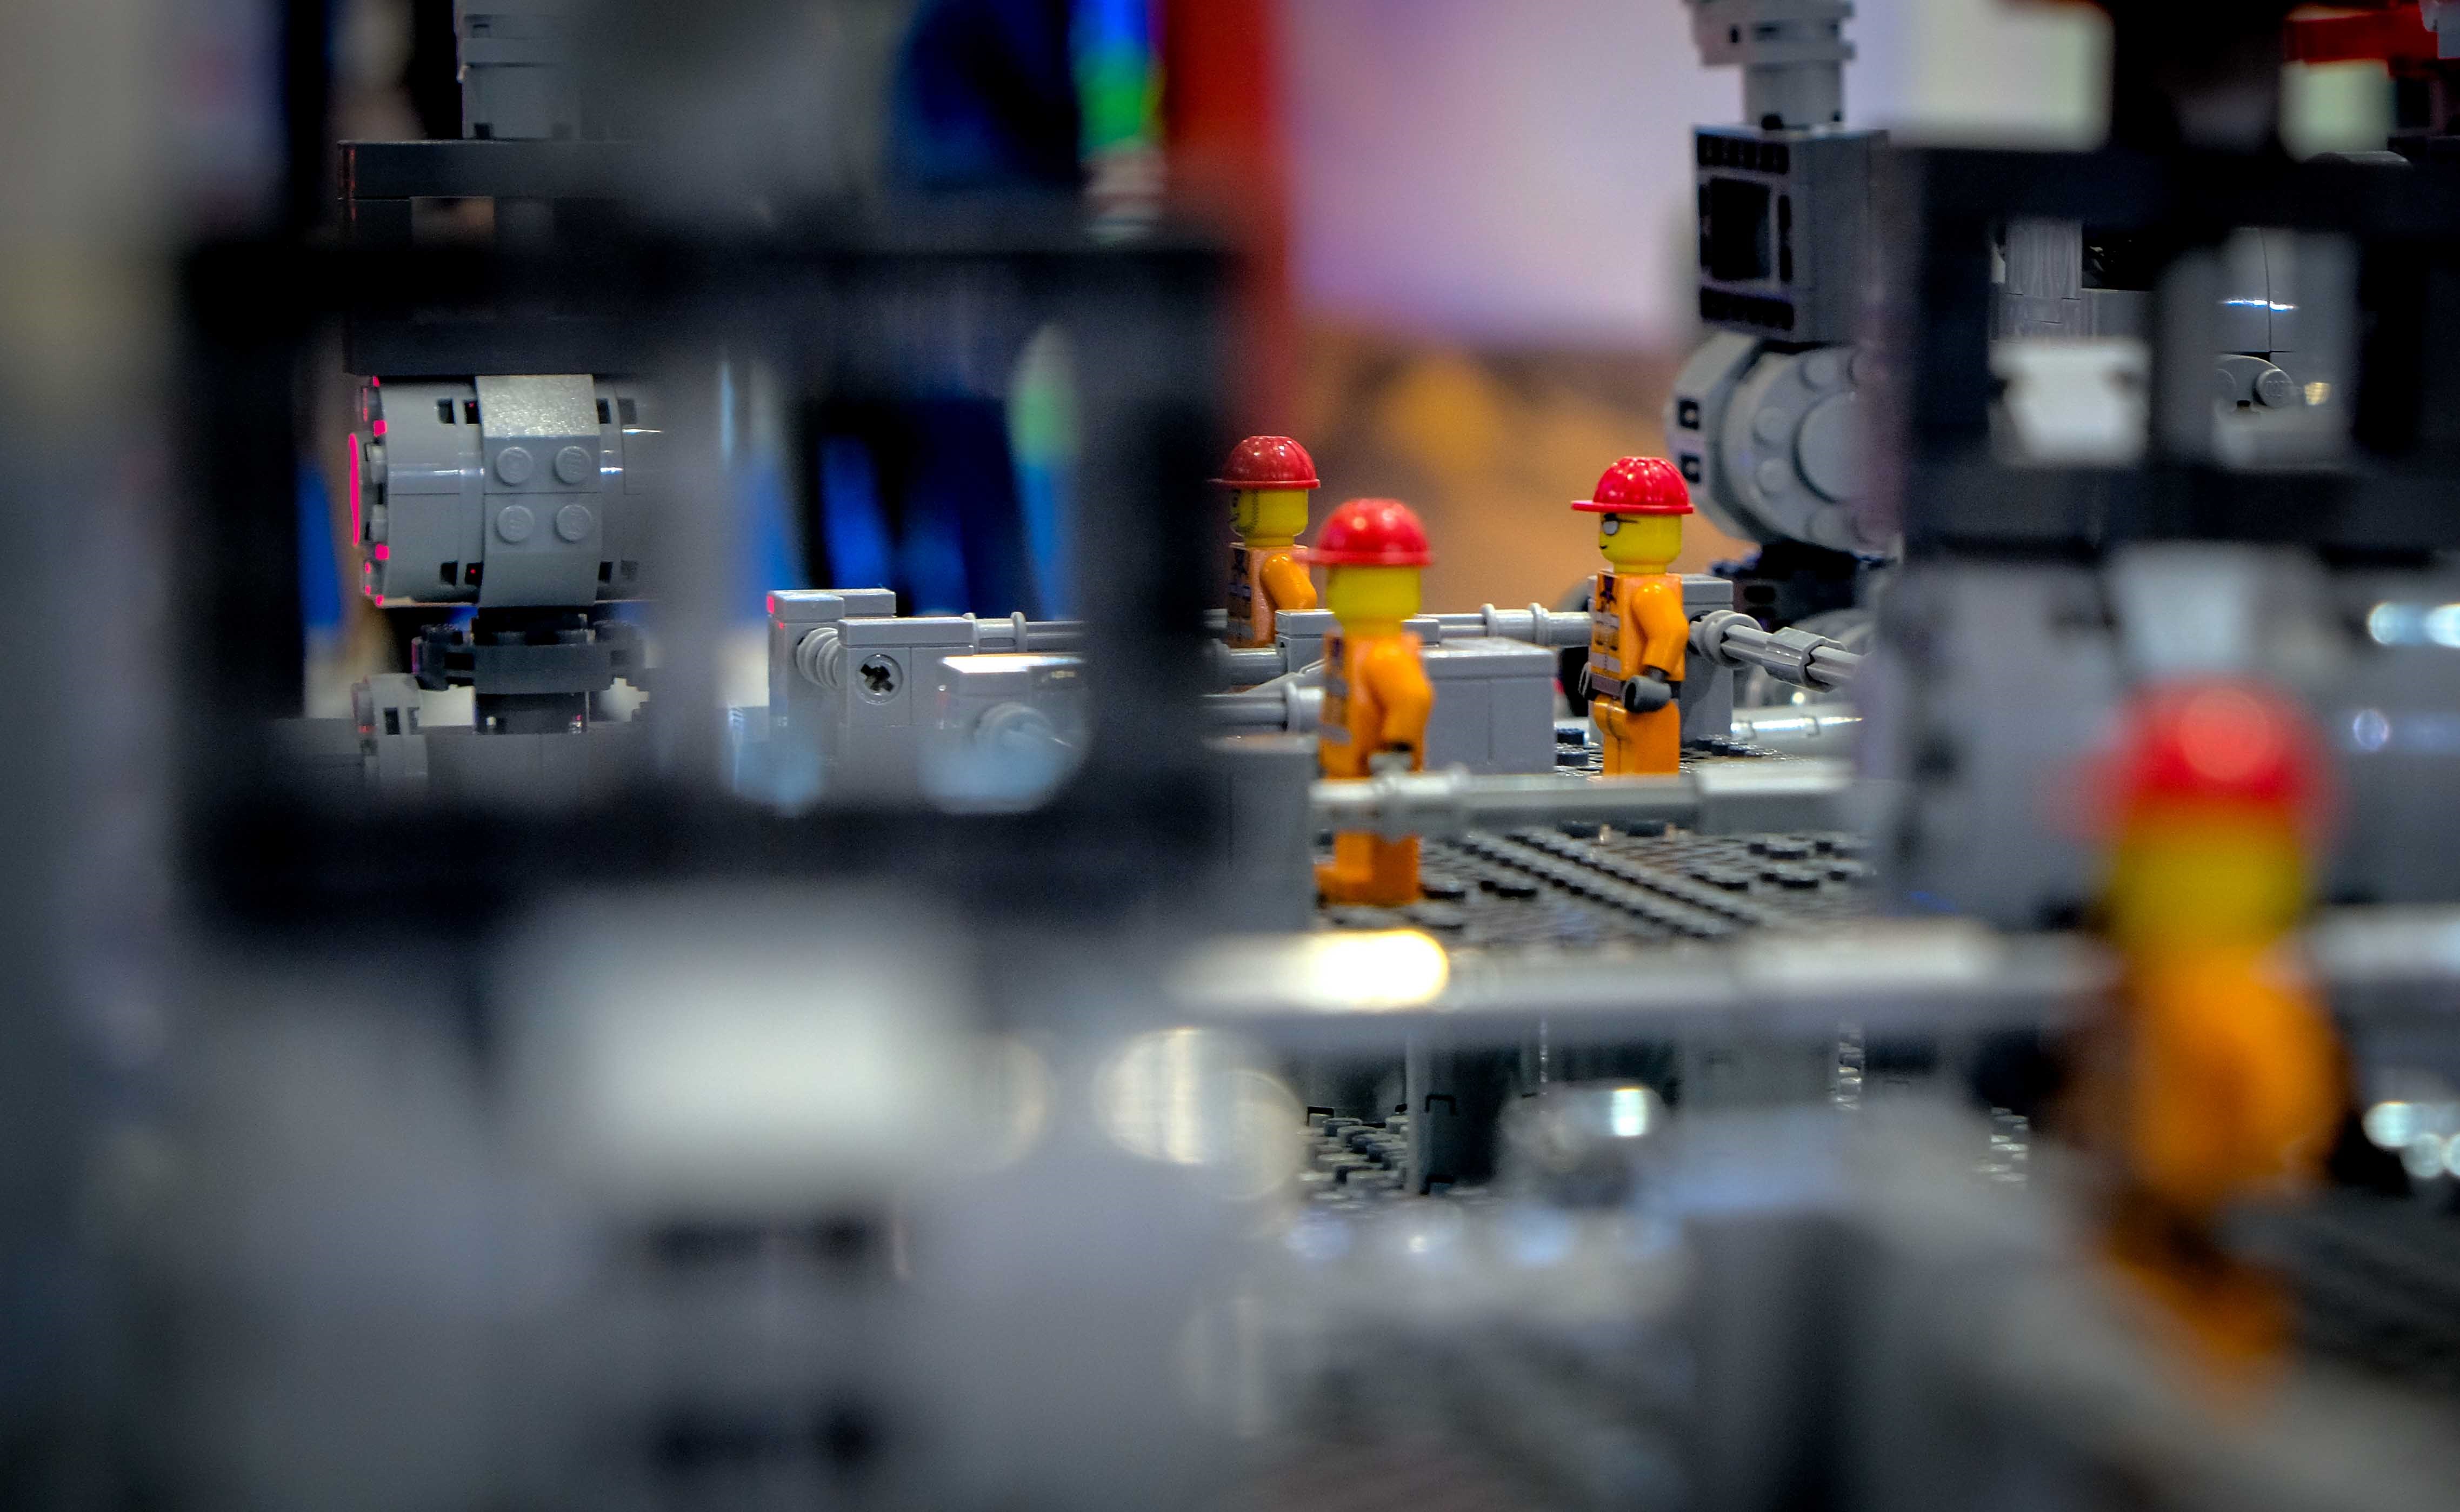 Lego to keep using oil-based materials as it looks for sustainable alternative 